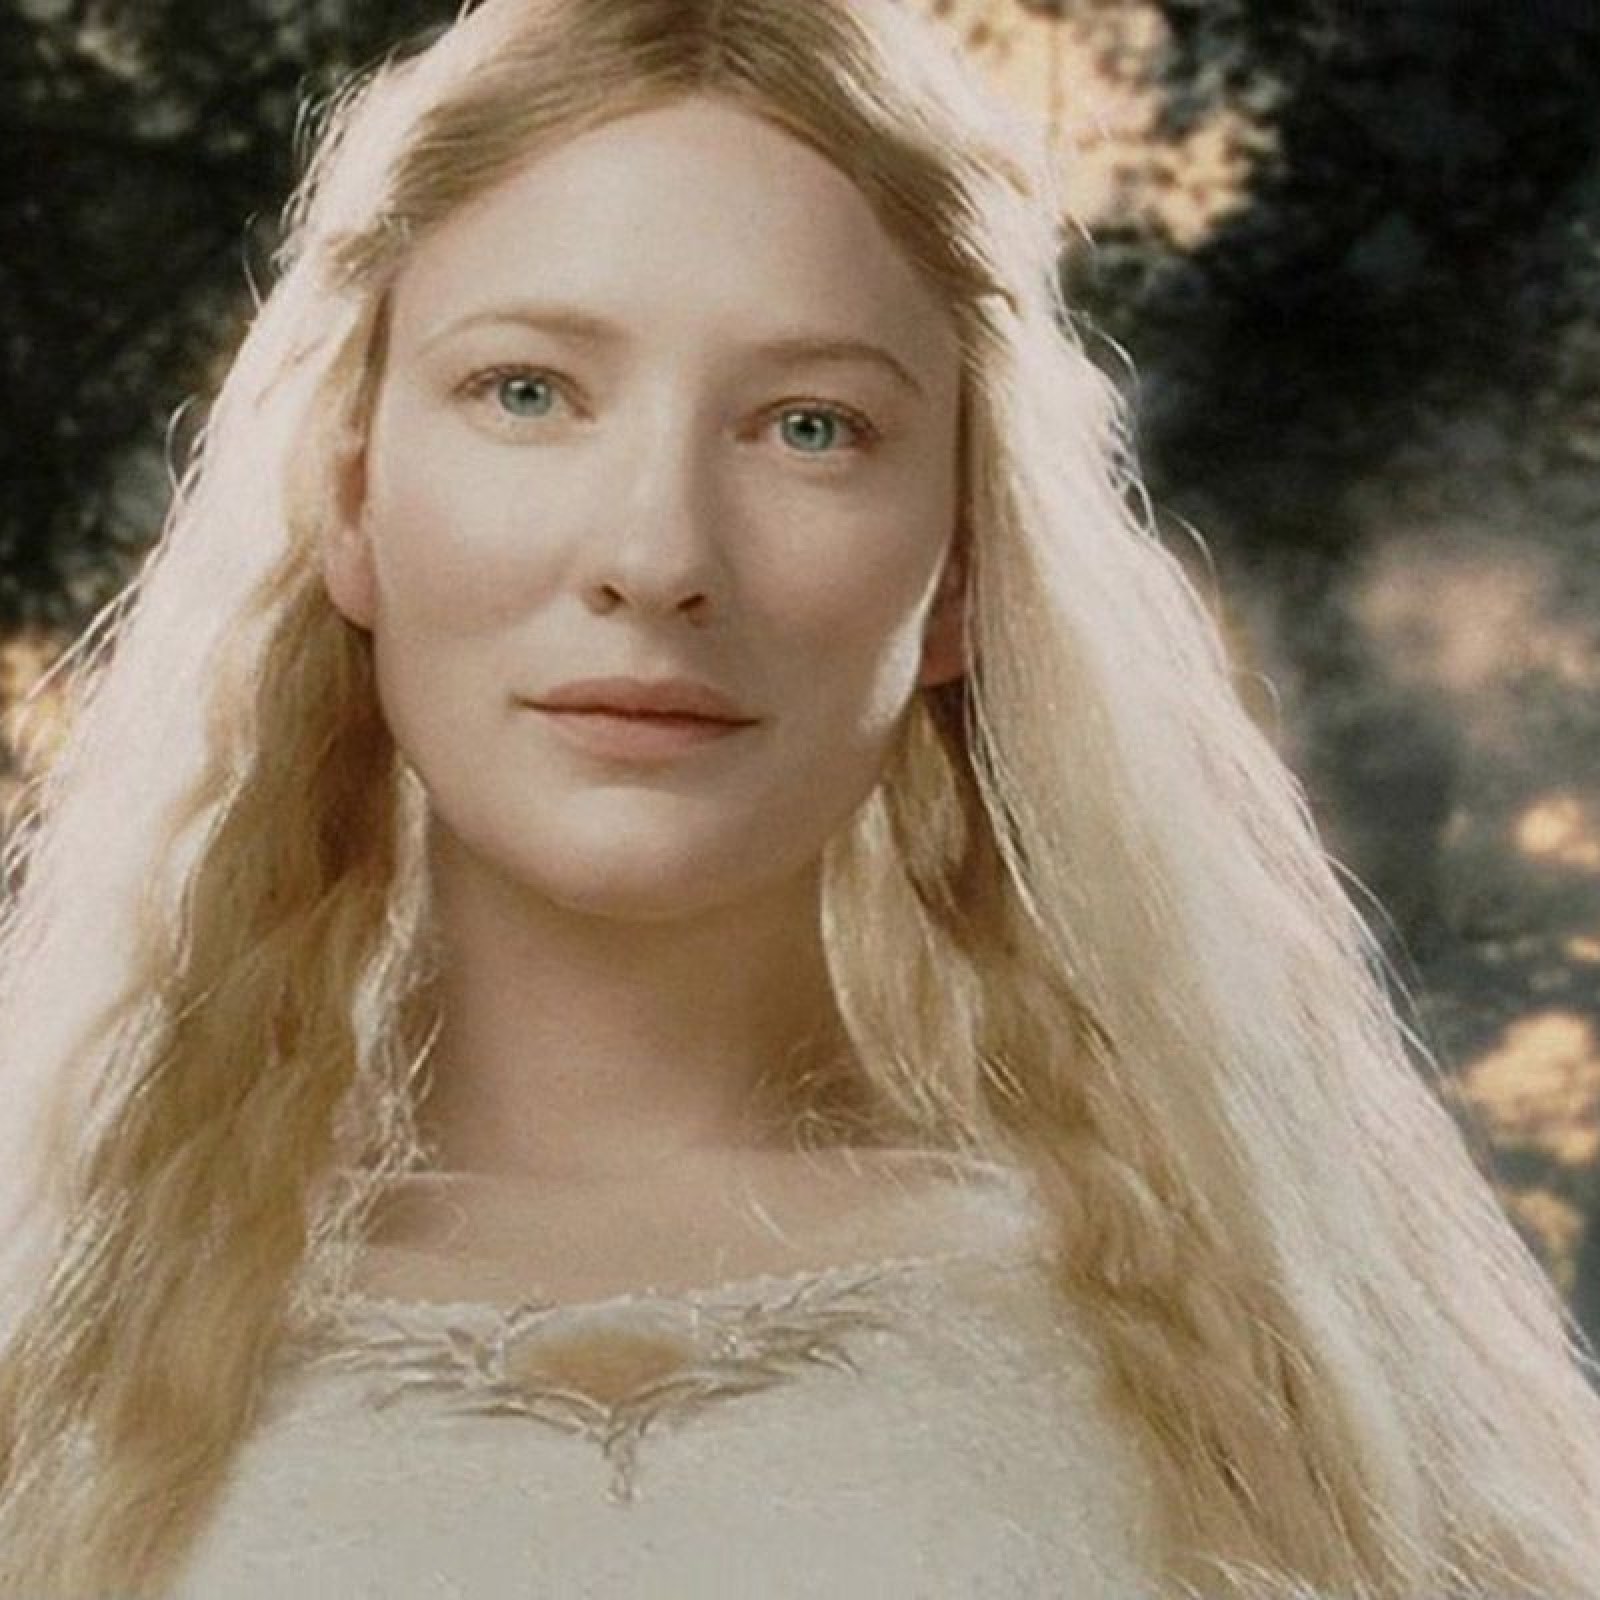 De Kind besluiten Lord of the Rings' Amazon Show: Which Characters Are Likely to Return?